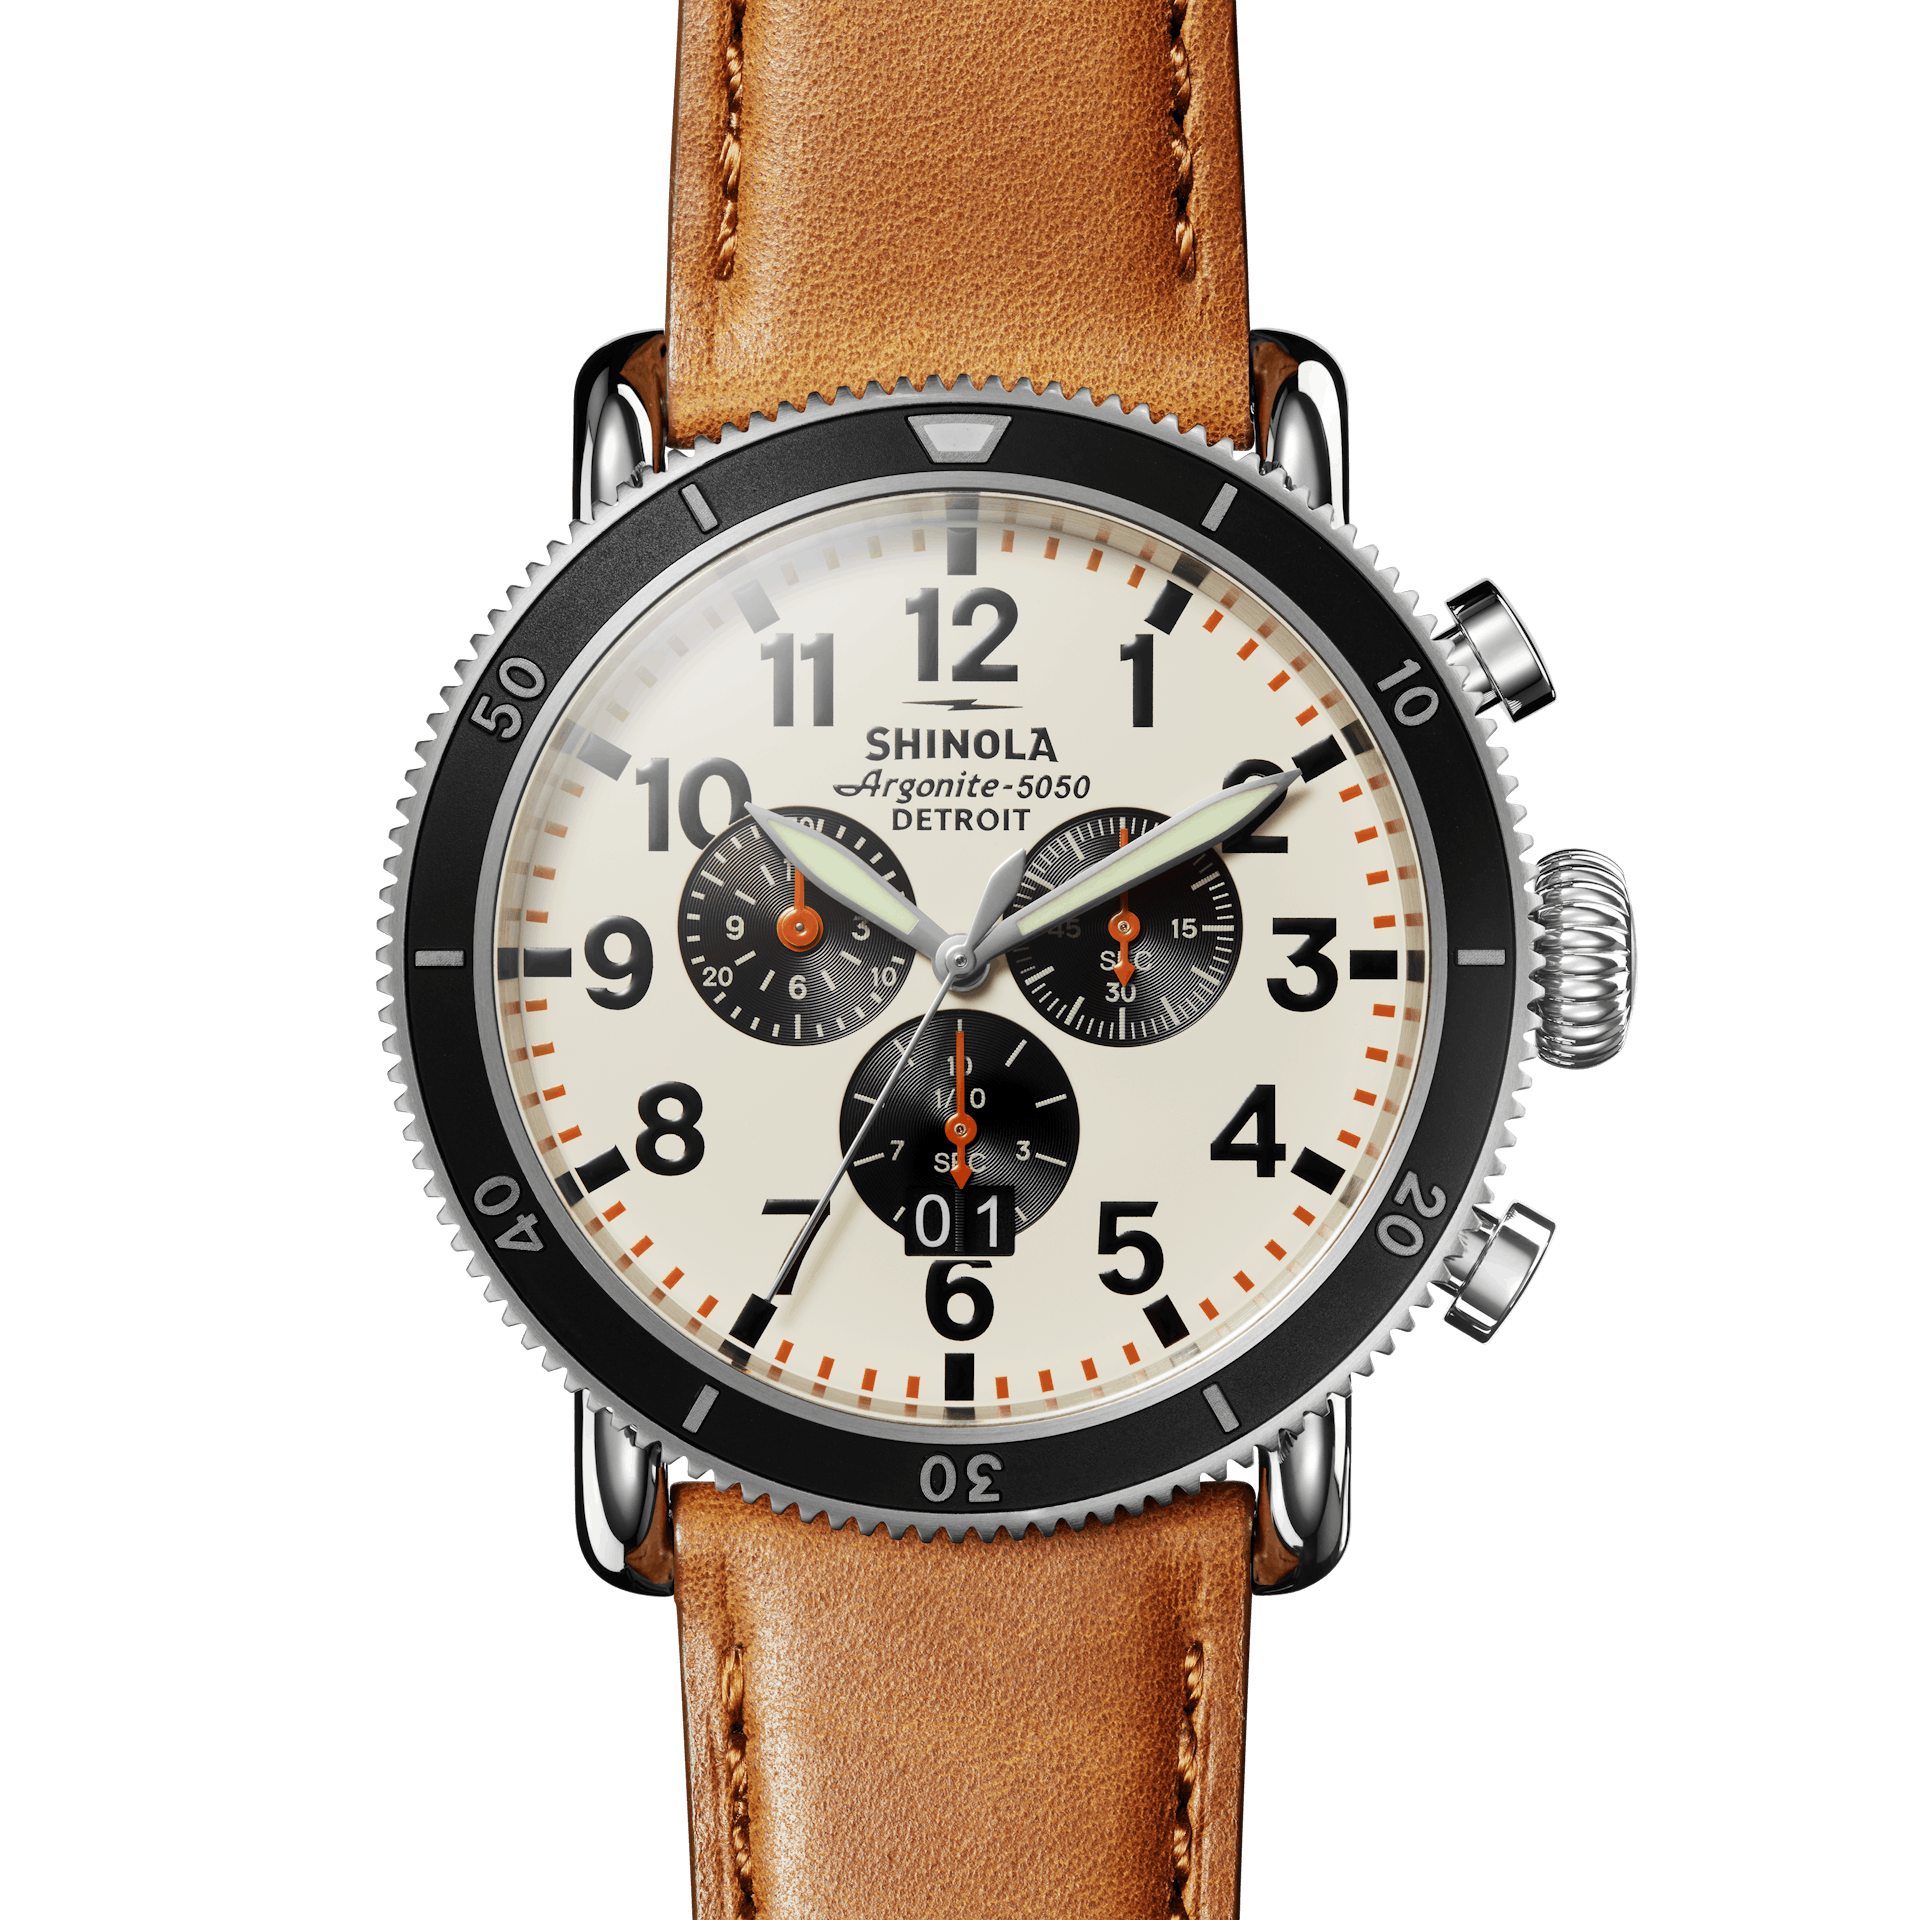 Timex Q Chronograph Review: Excellent, Precise Cream of the Timex Crop |  GearJunkie